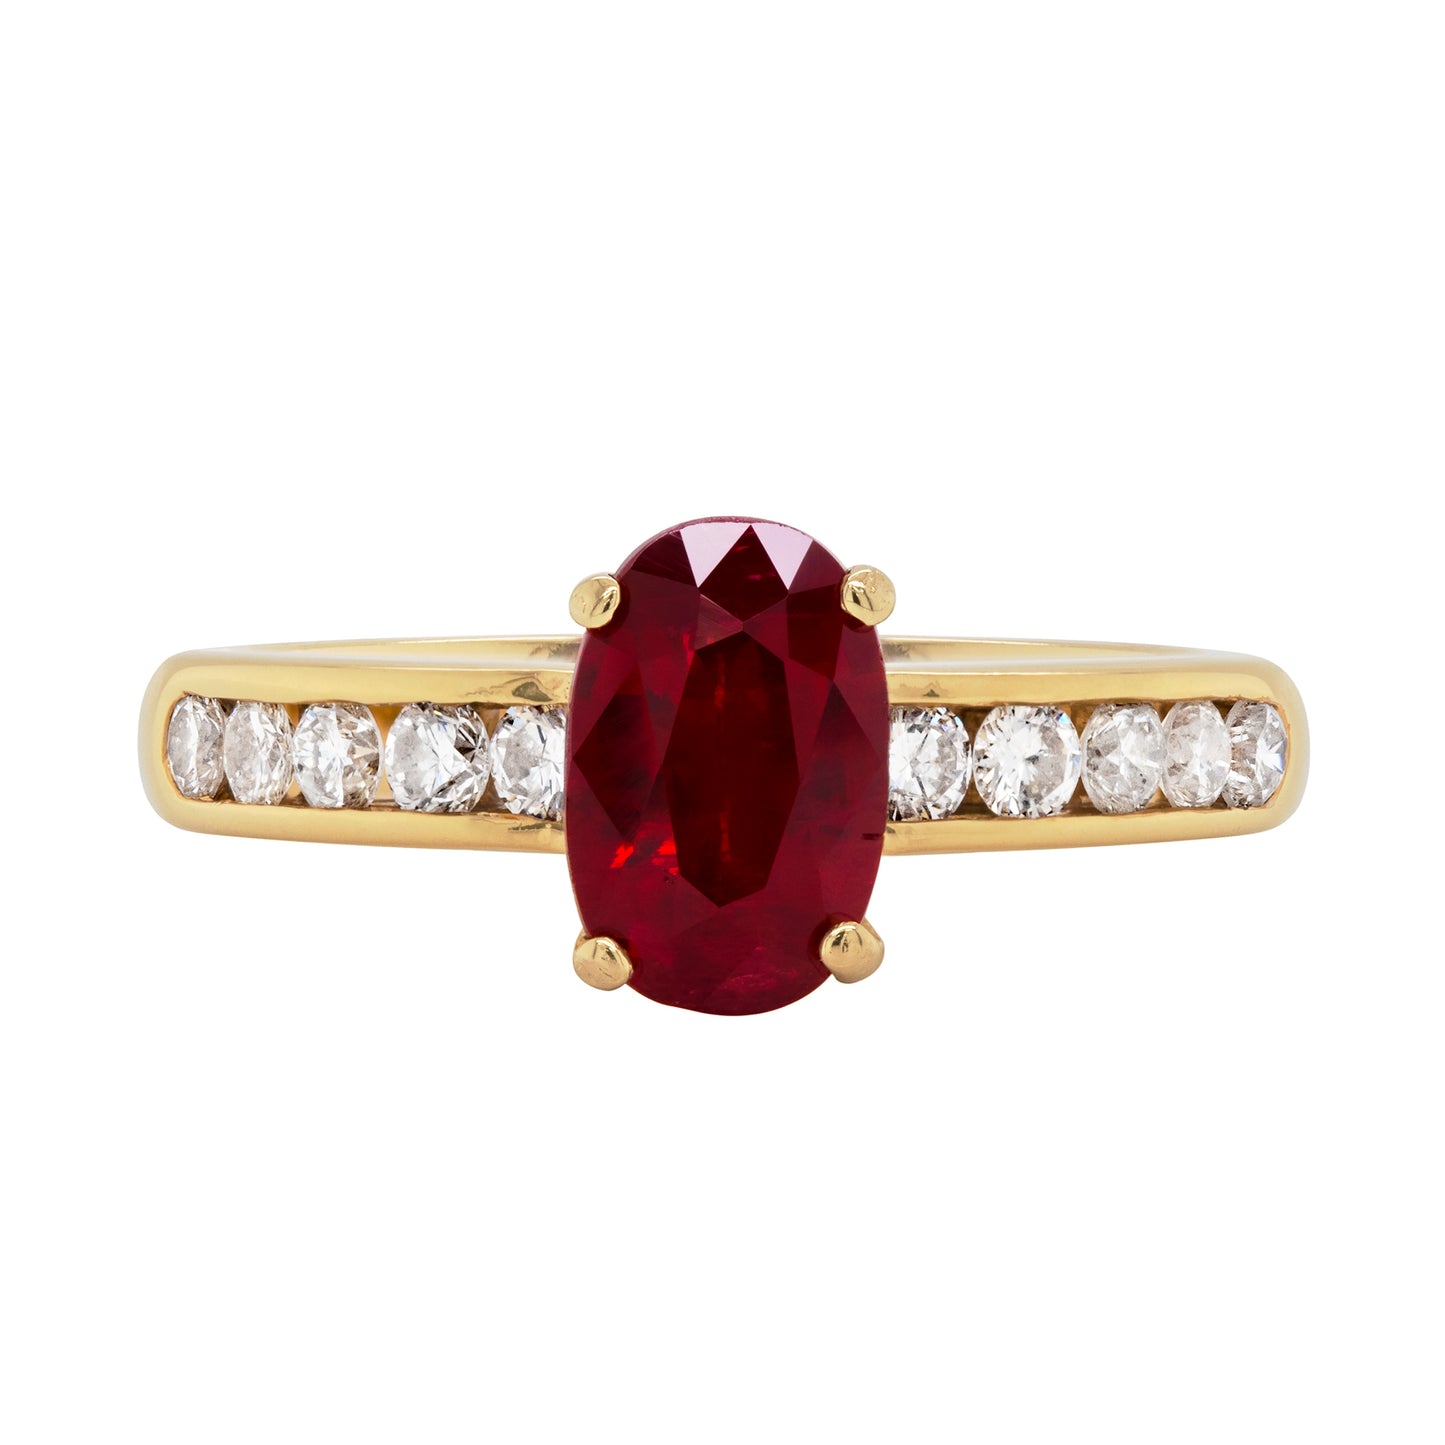 2.15 Carat Ruby and Diamond 18 Carat Yellow Gold Engagement Ring